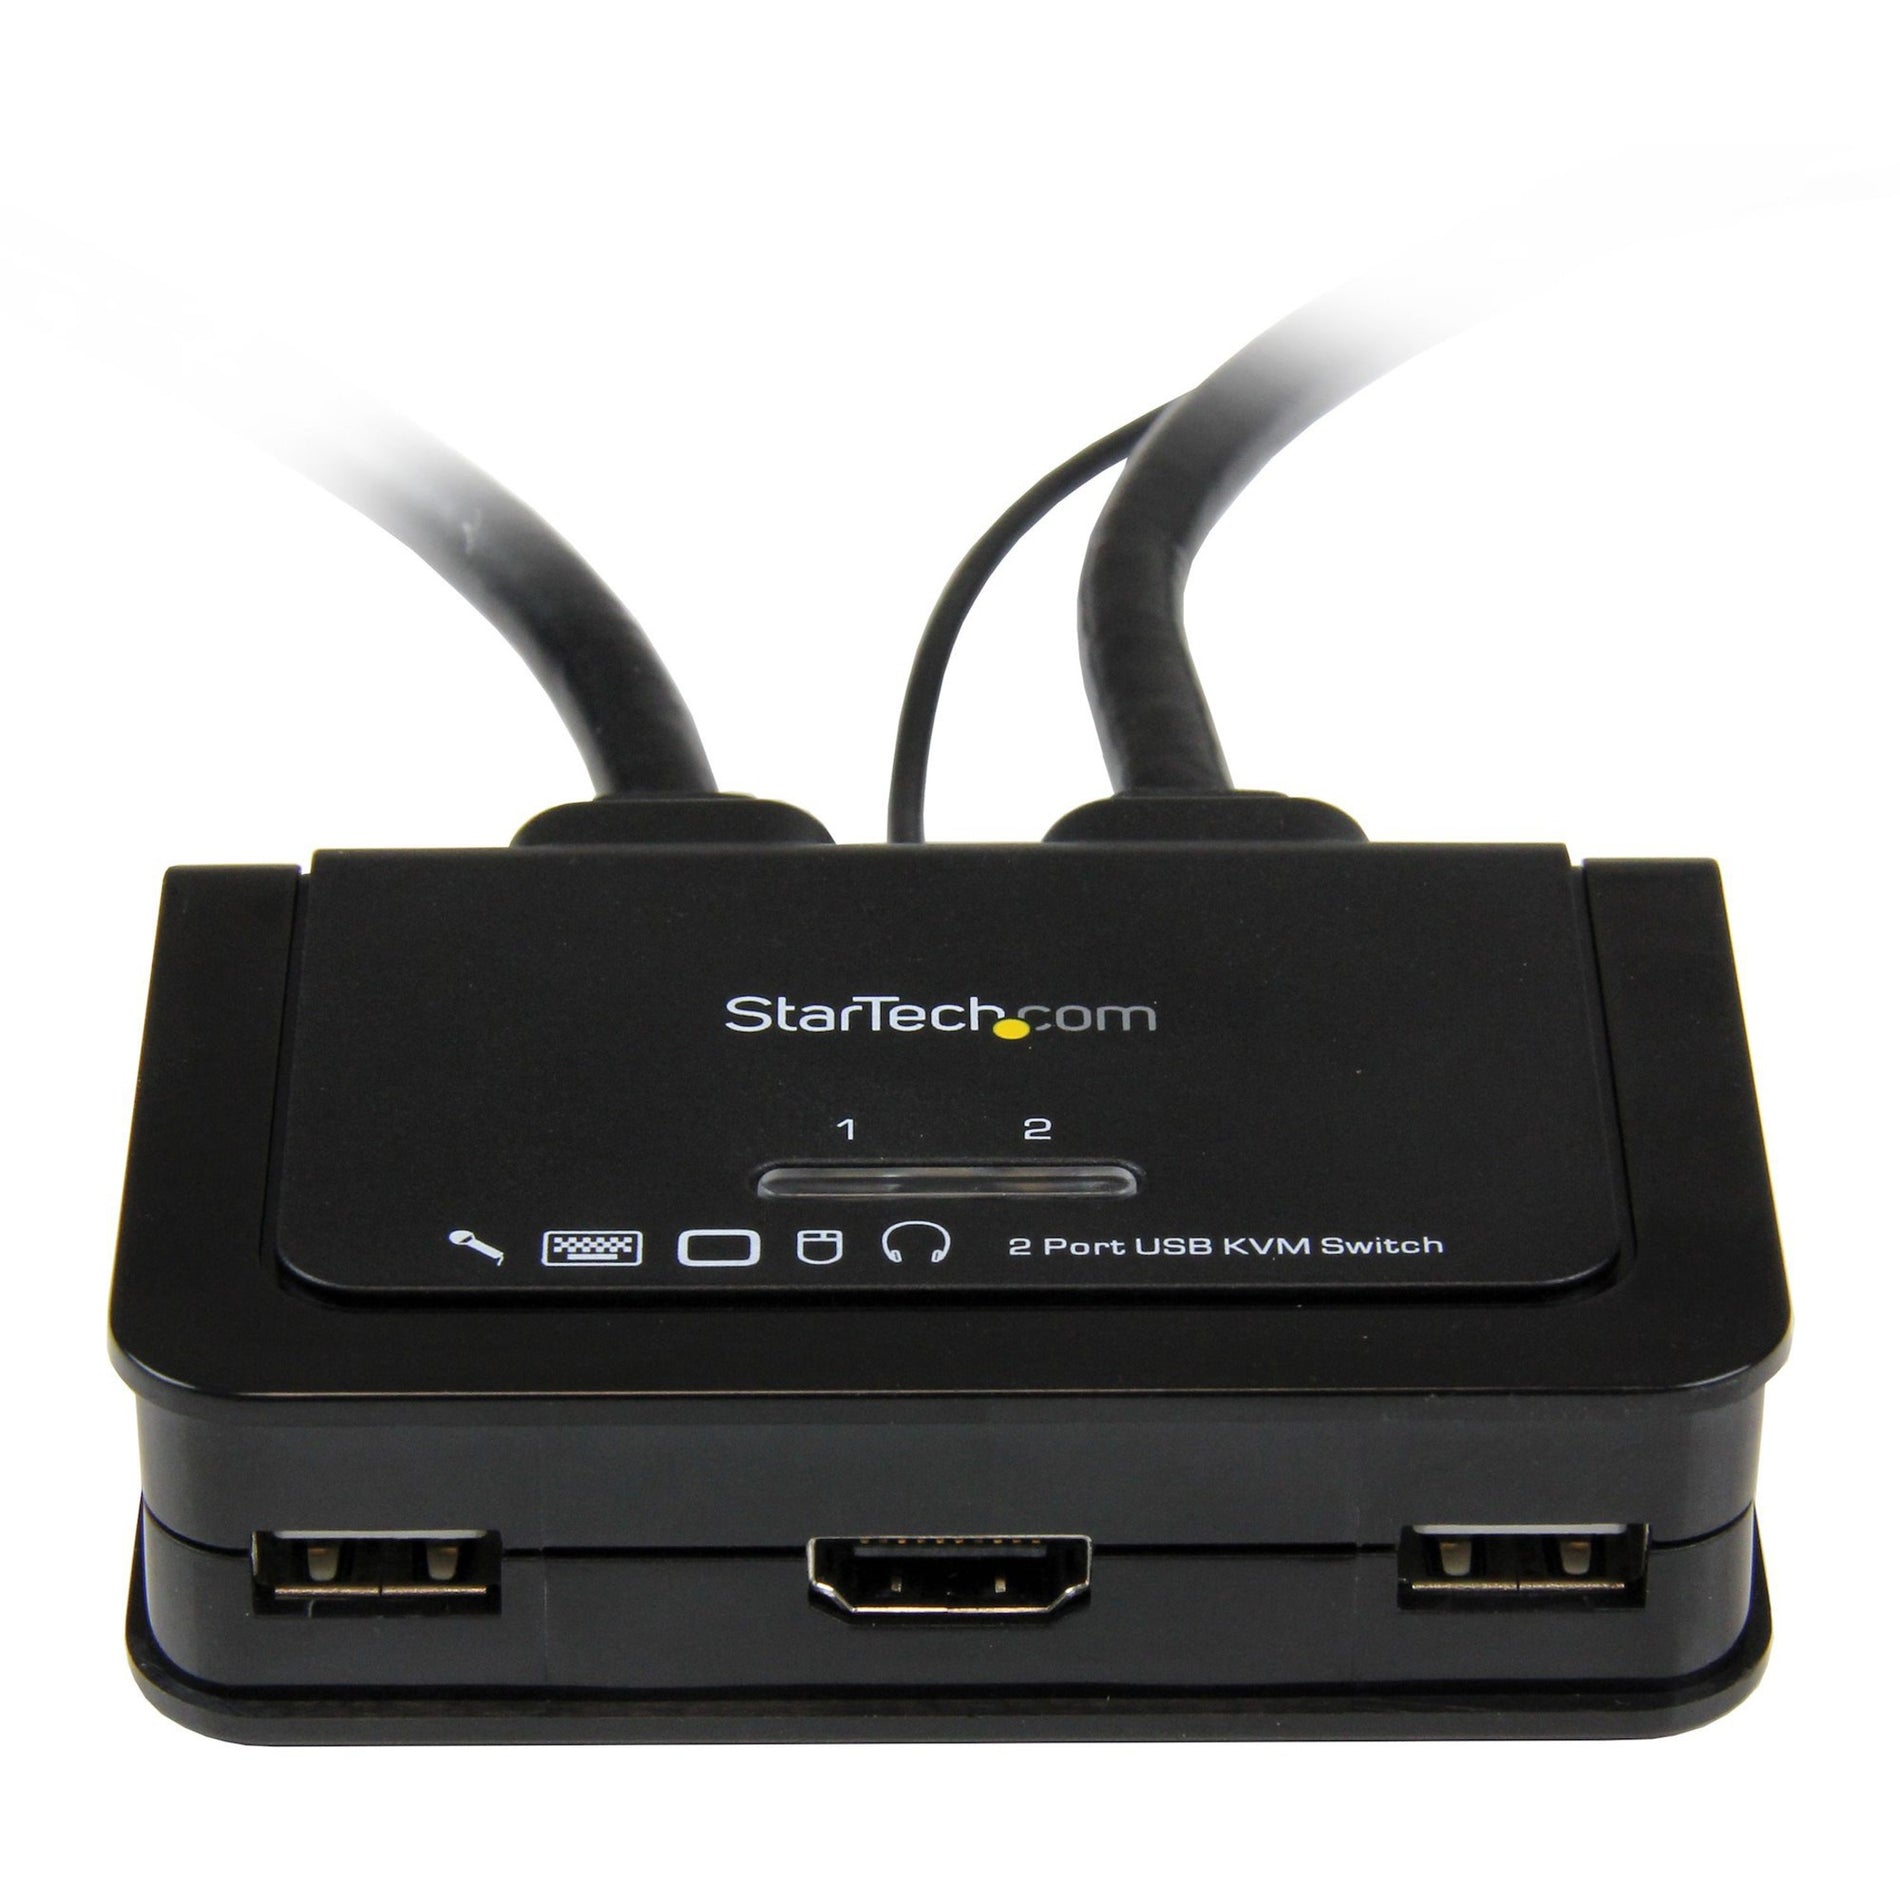 StarTech.com SV211HDUA 2 Port USB HDMI Cable KVM Switch with Audio and Remote Switch, WUXGA, 1920 x 1200, 2 Year Warranty